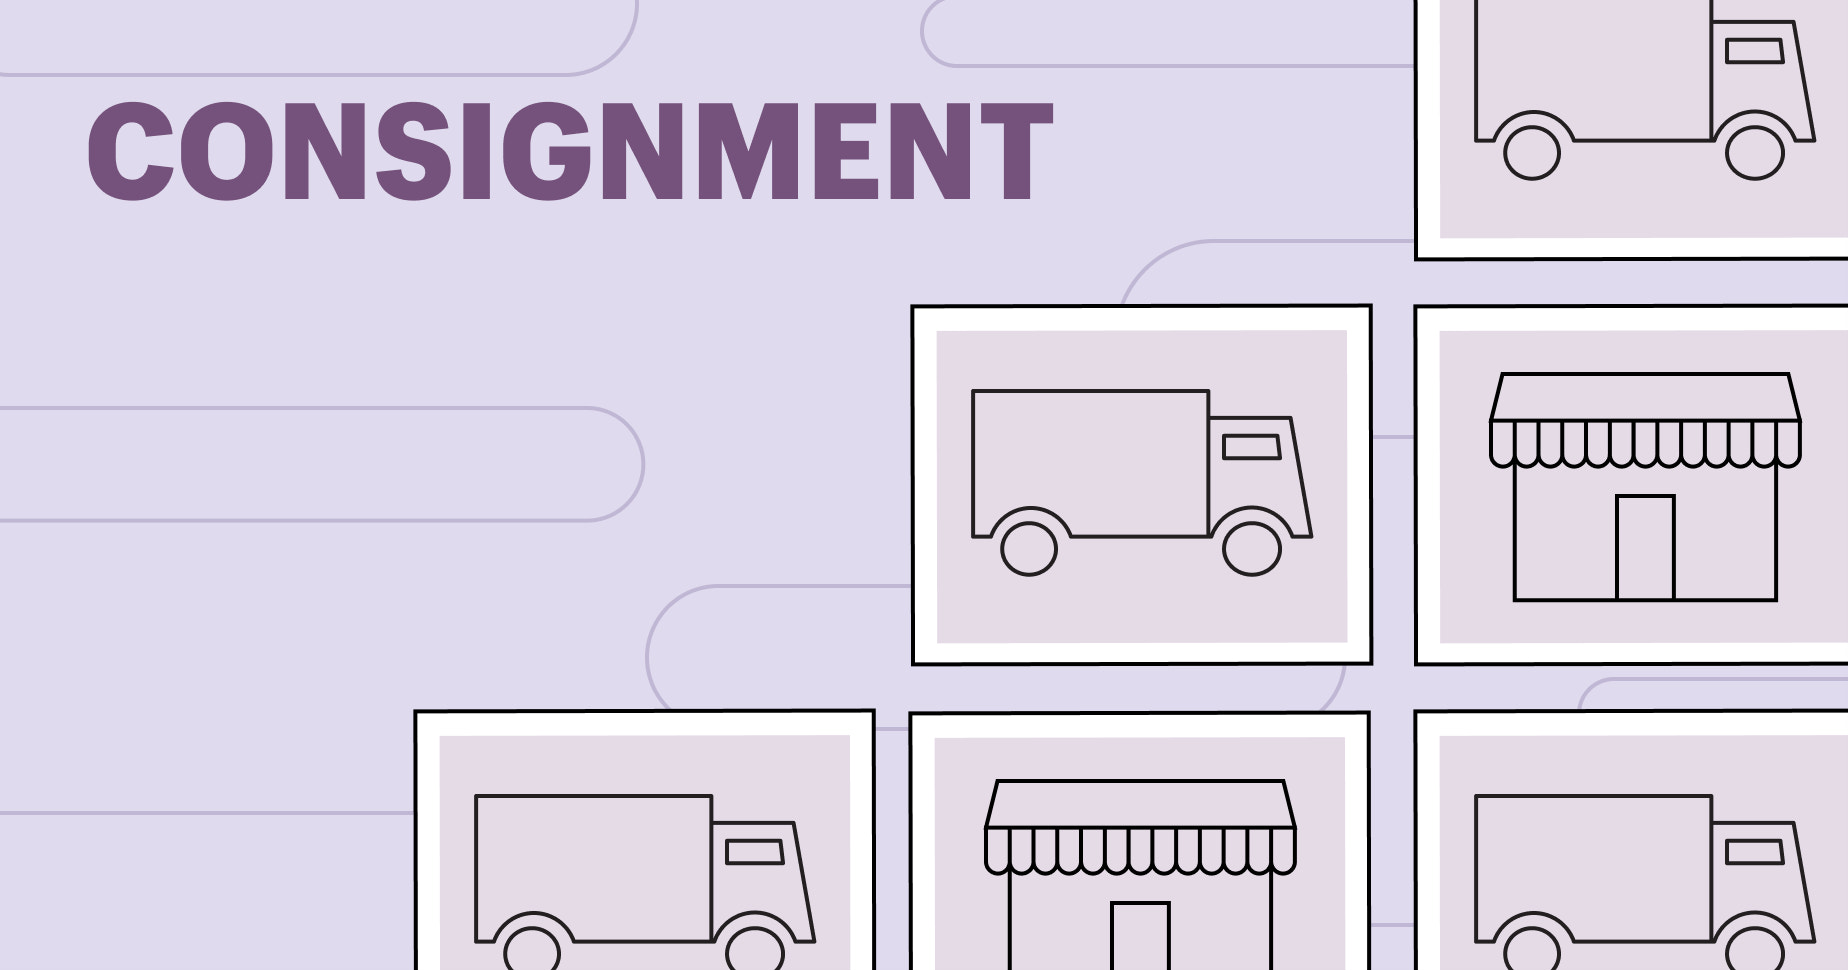 What is consignment feature image